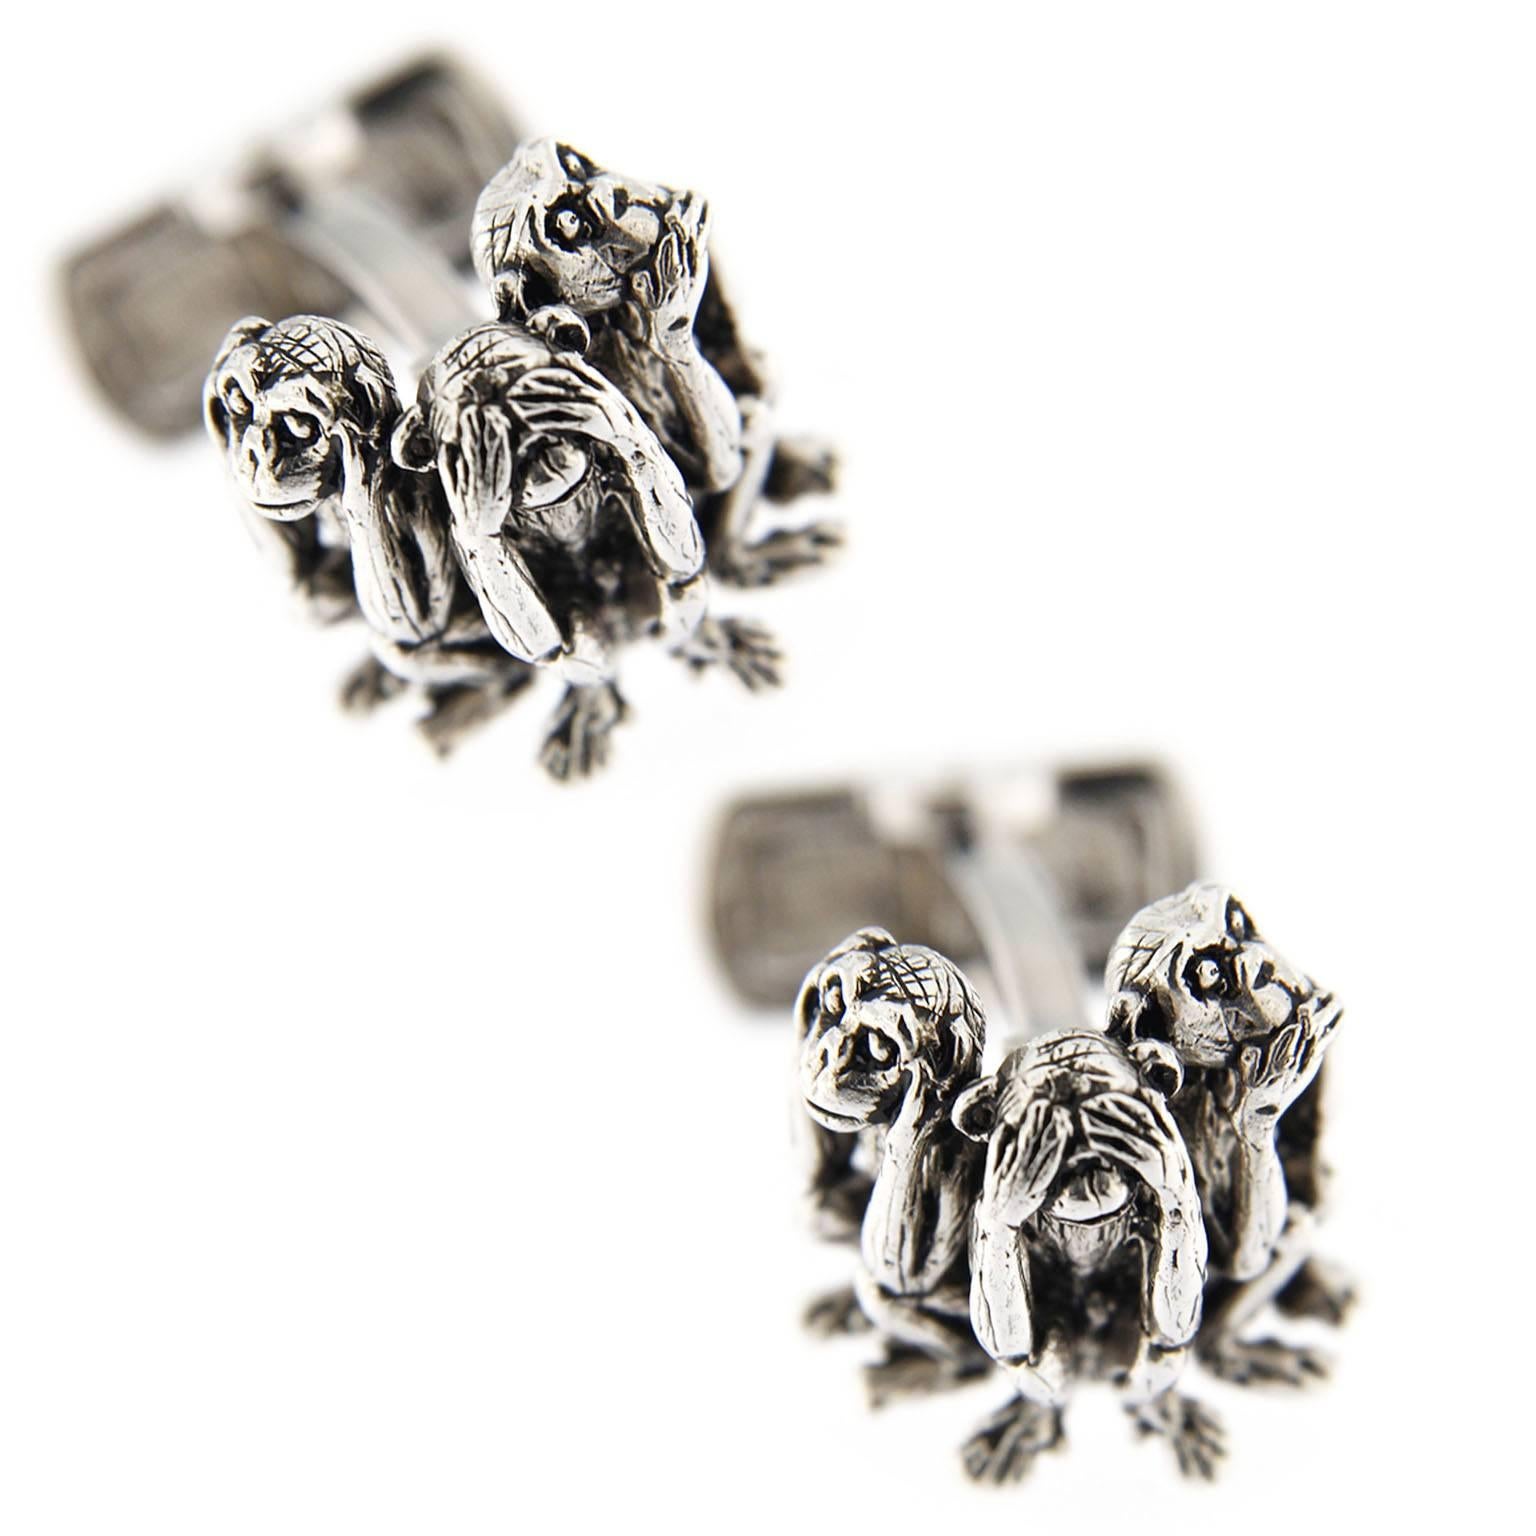 Jona design collection, hand crafted in Italy, rhodium plated sterling silver three wise monkeys cufflinks with toggle back. Marked JONA 925.
All Jona jewelry is new and has never been previously owned or worn. Each item will arrive at your door